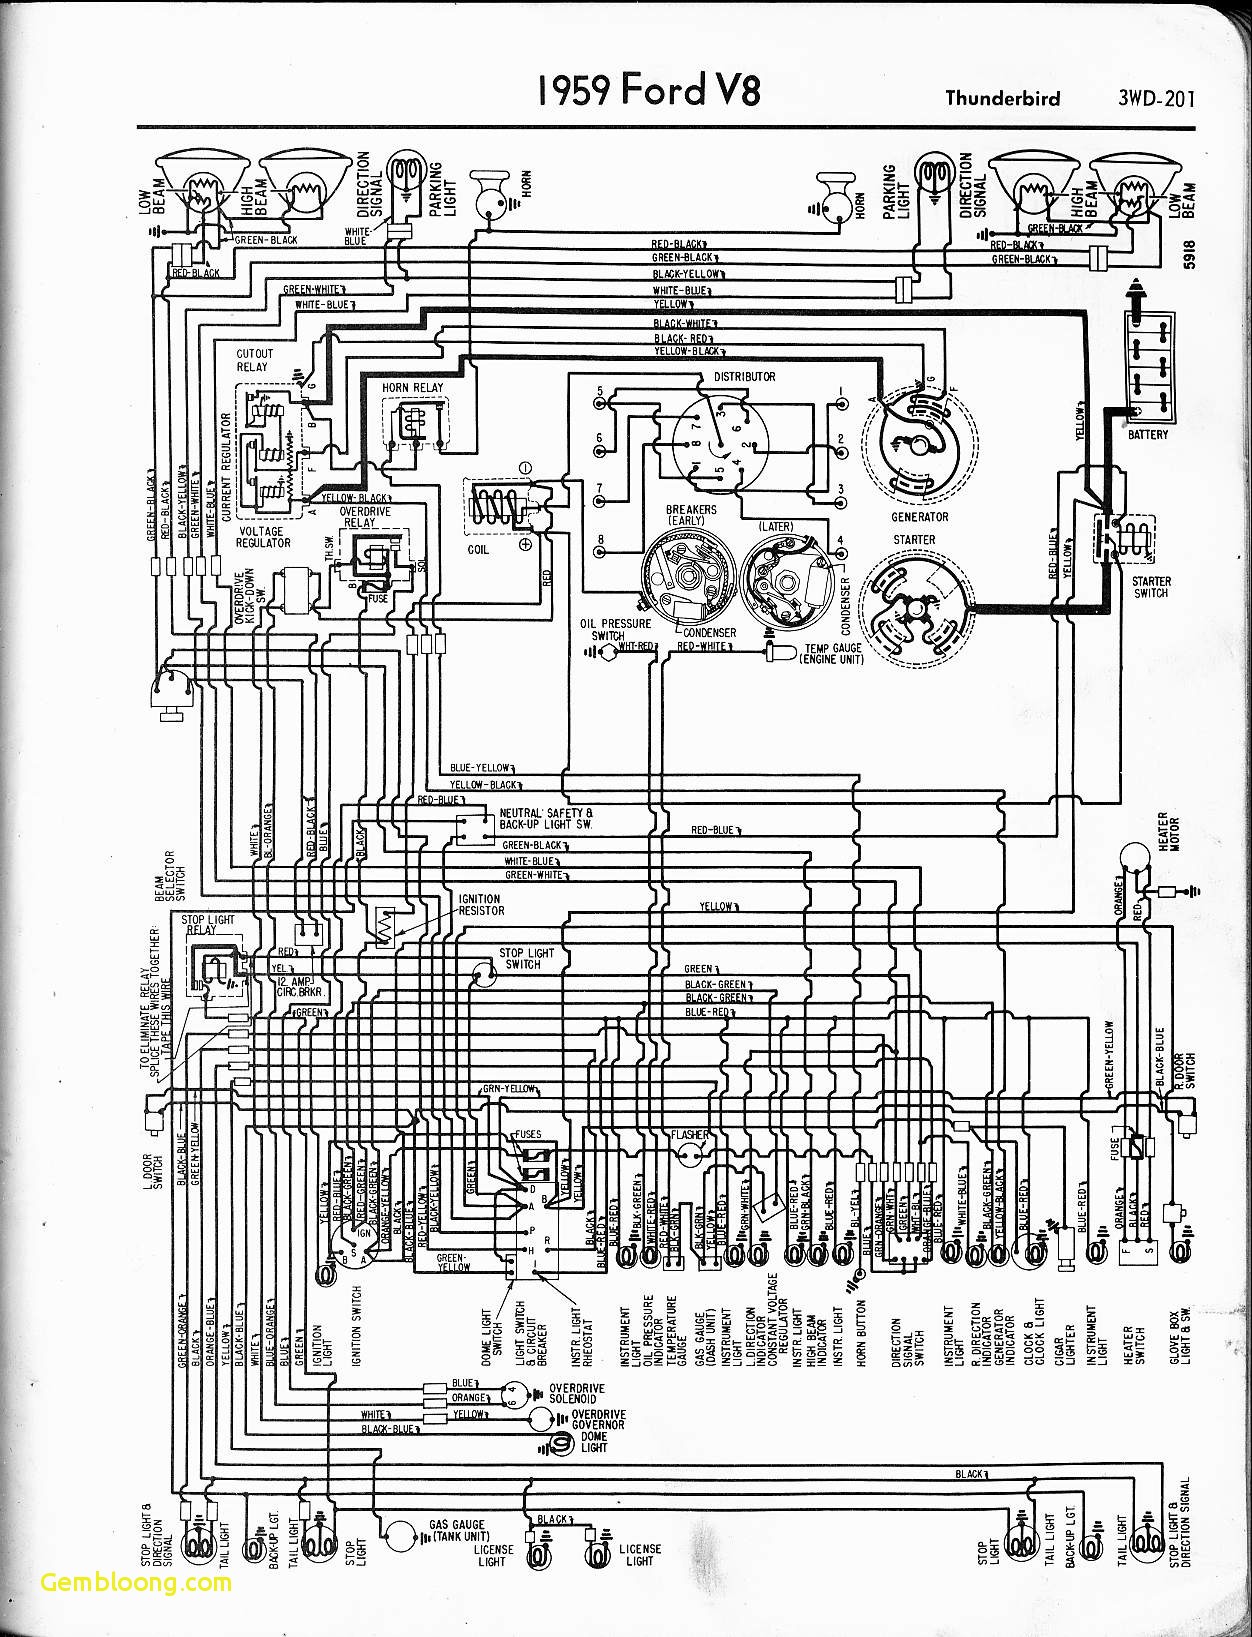 ford trucks wiring diagrams ford f150 wiring diagrams best volvo s40 2 0d engine diagram free of ford trucks wiring diagrams 1